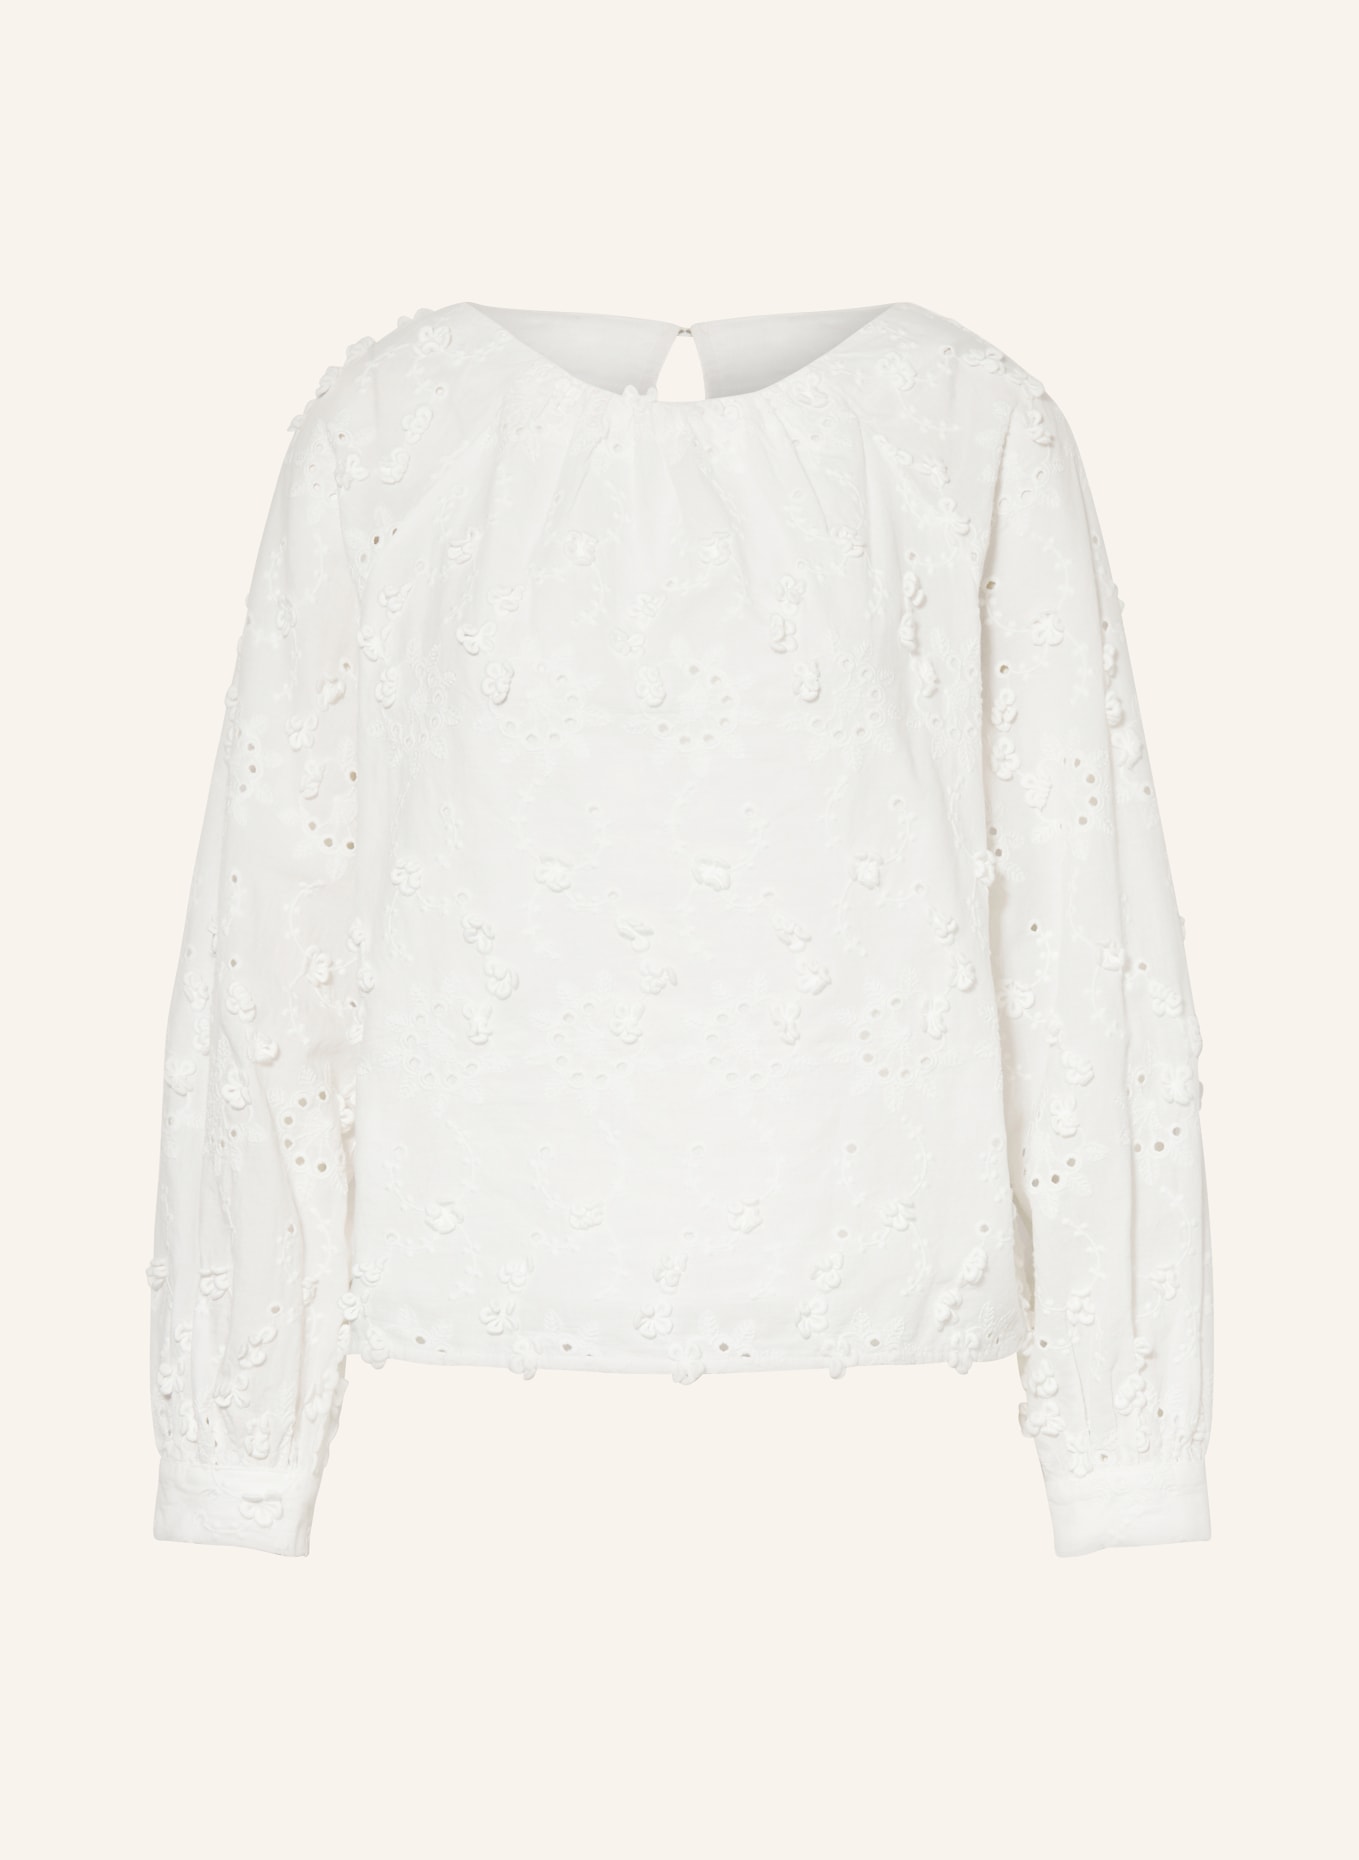 Y.A.S. Shirt blouse with broderie anglaise, Color: WHITE (Image 1)